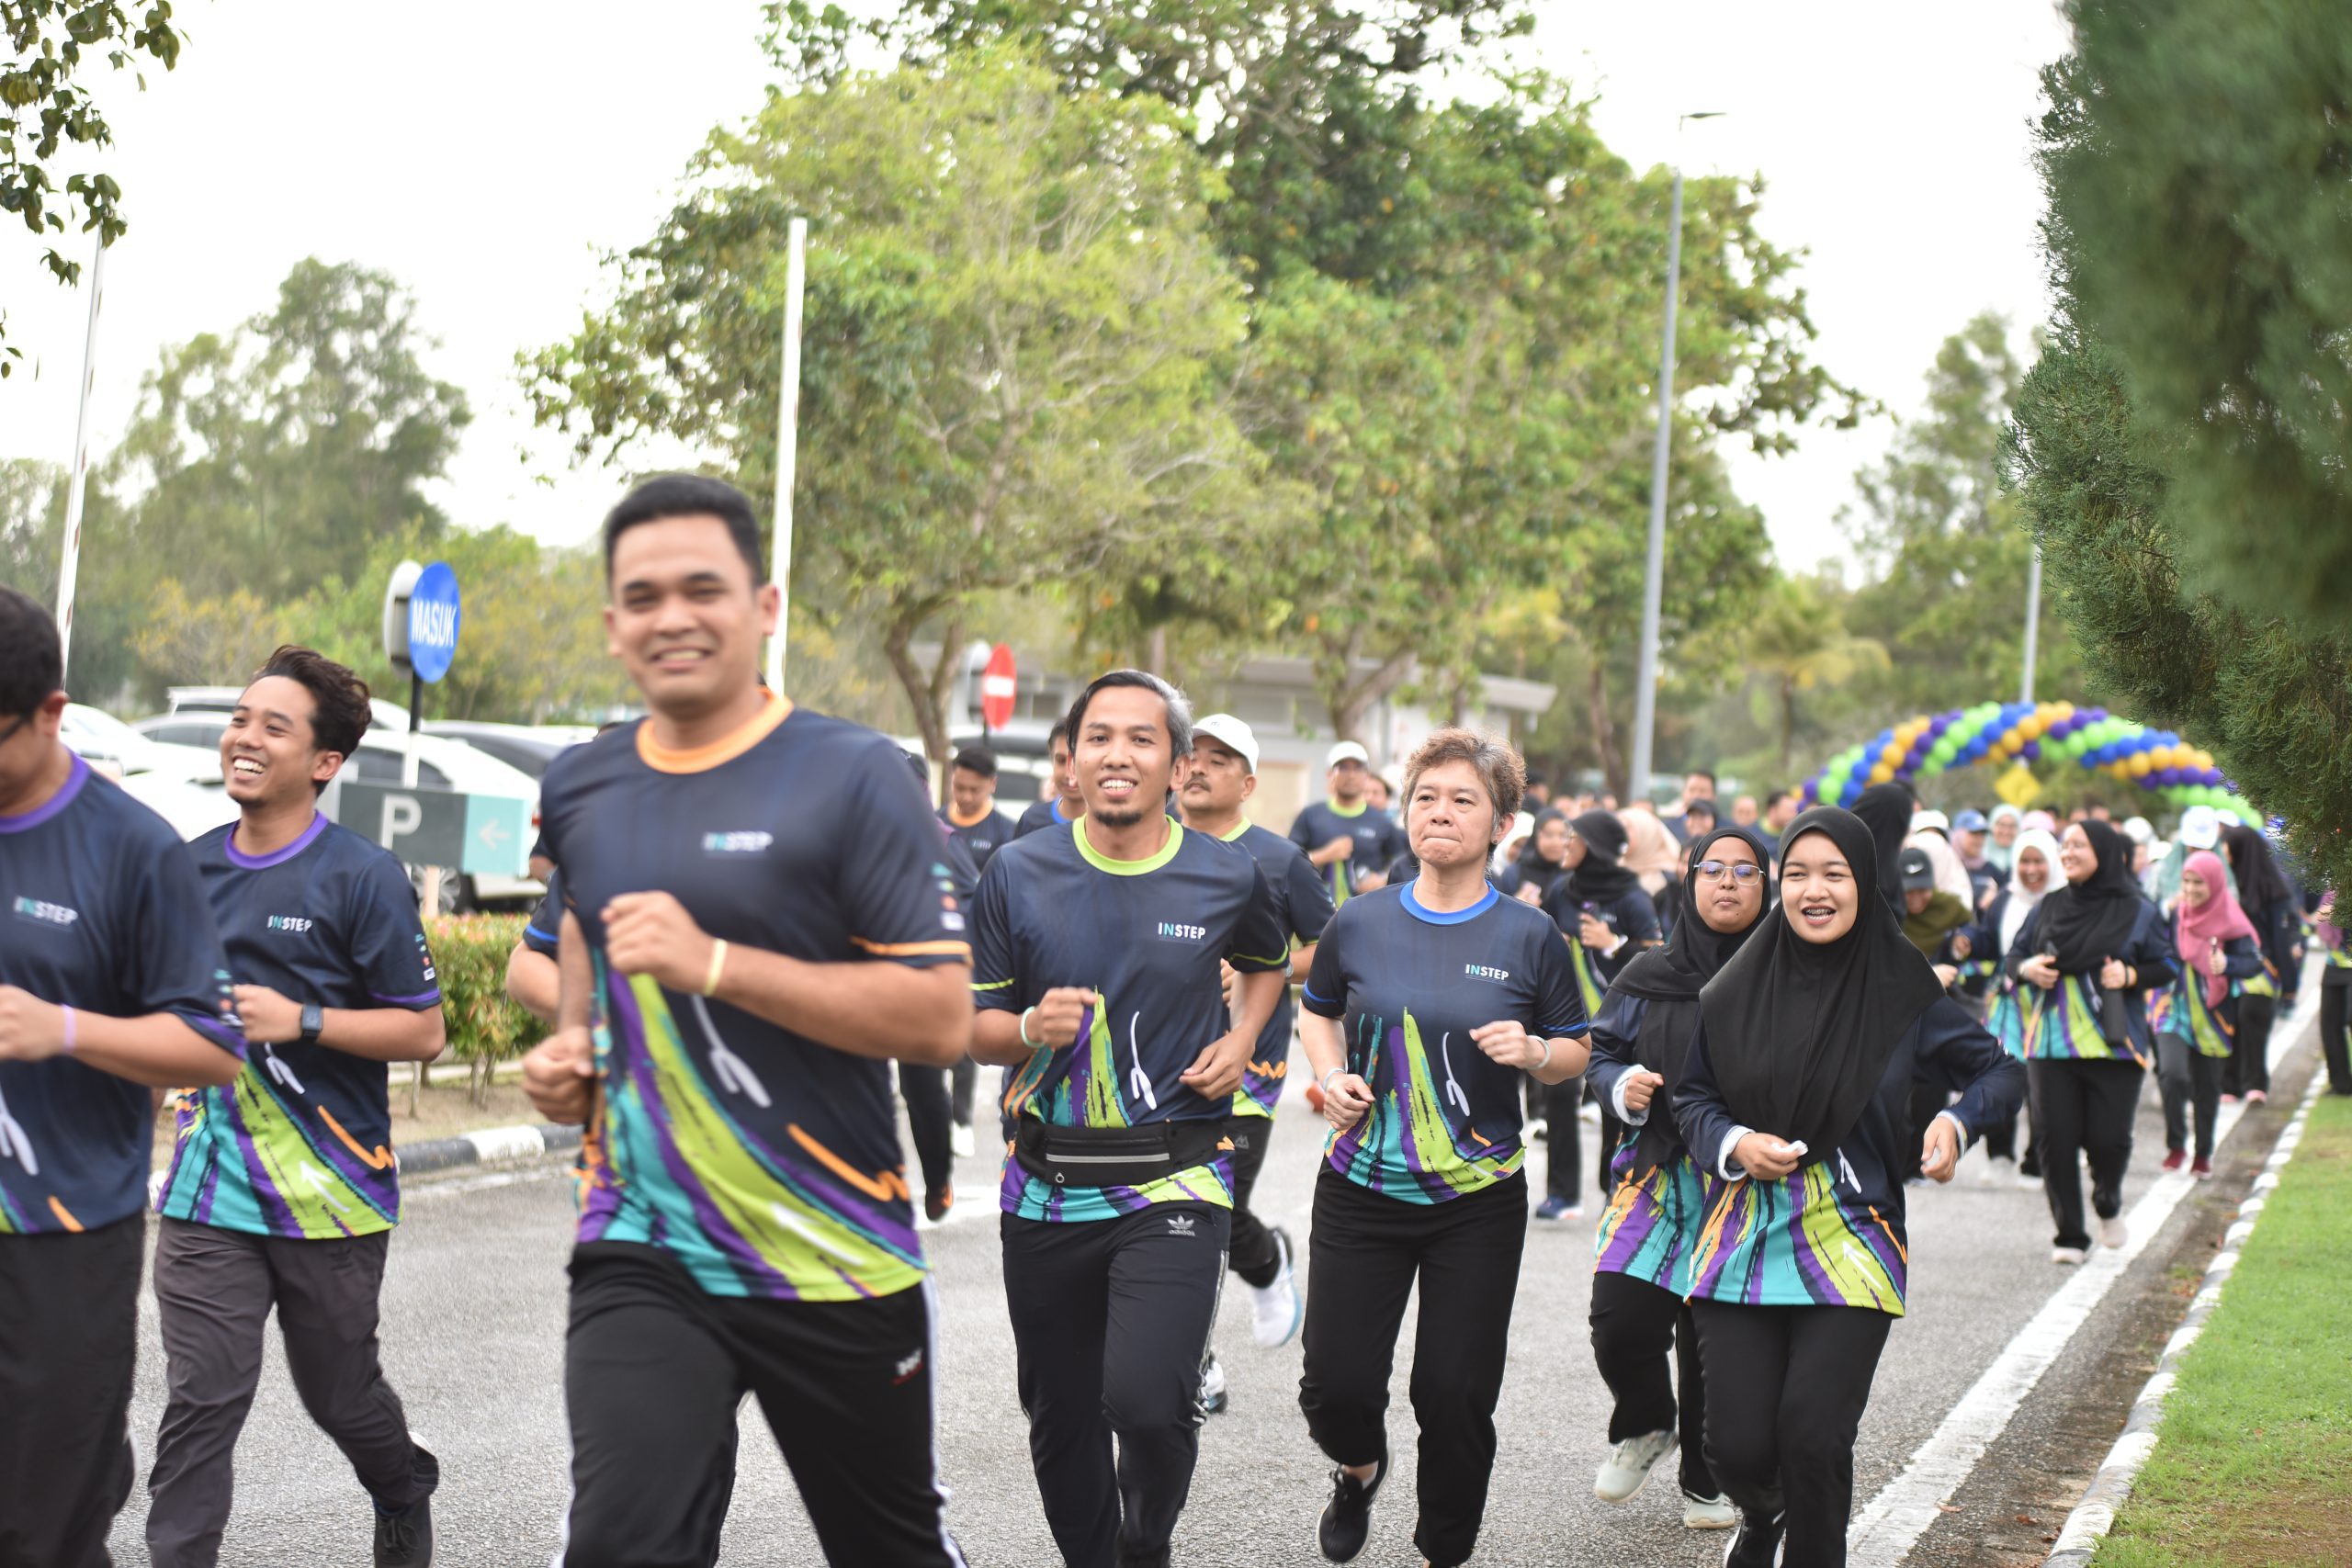 Running with smiles, many enjoyed the brief run with their colleagues.